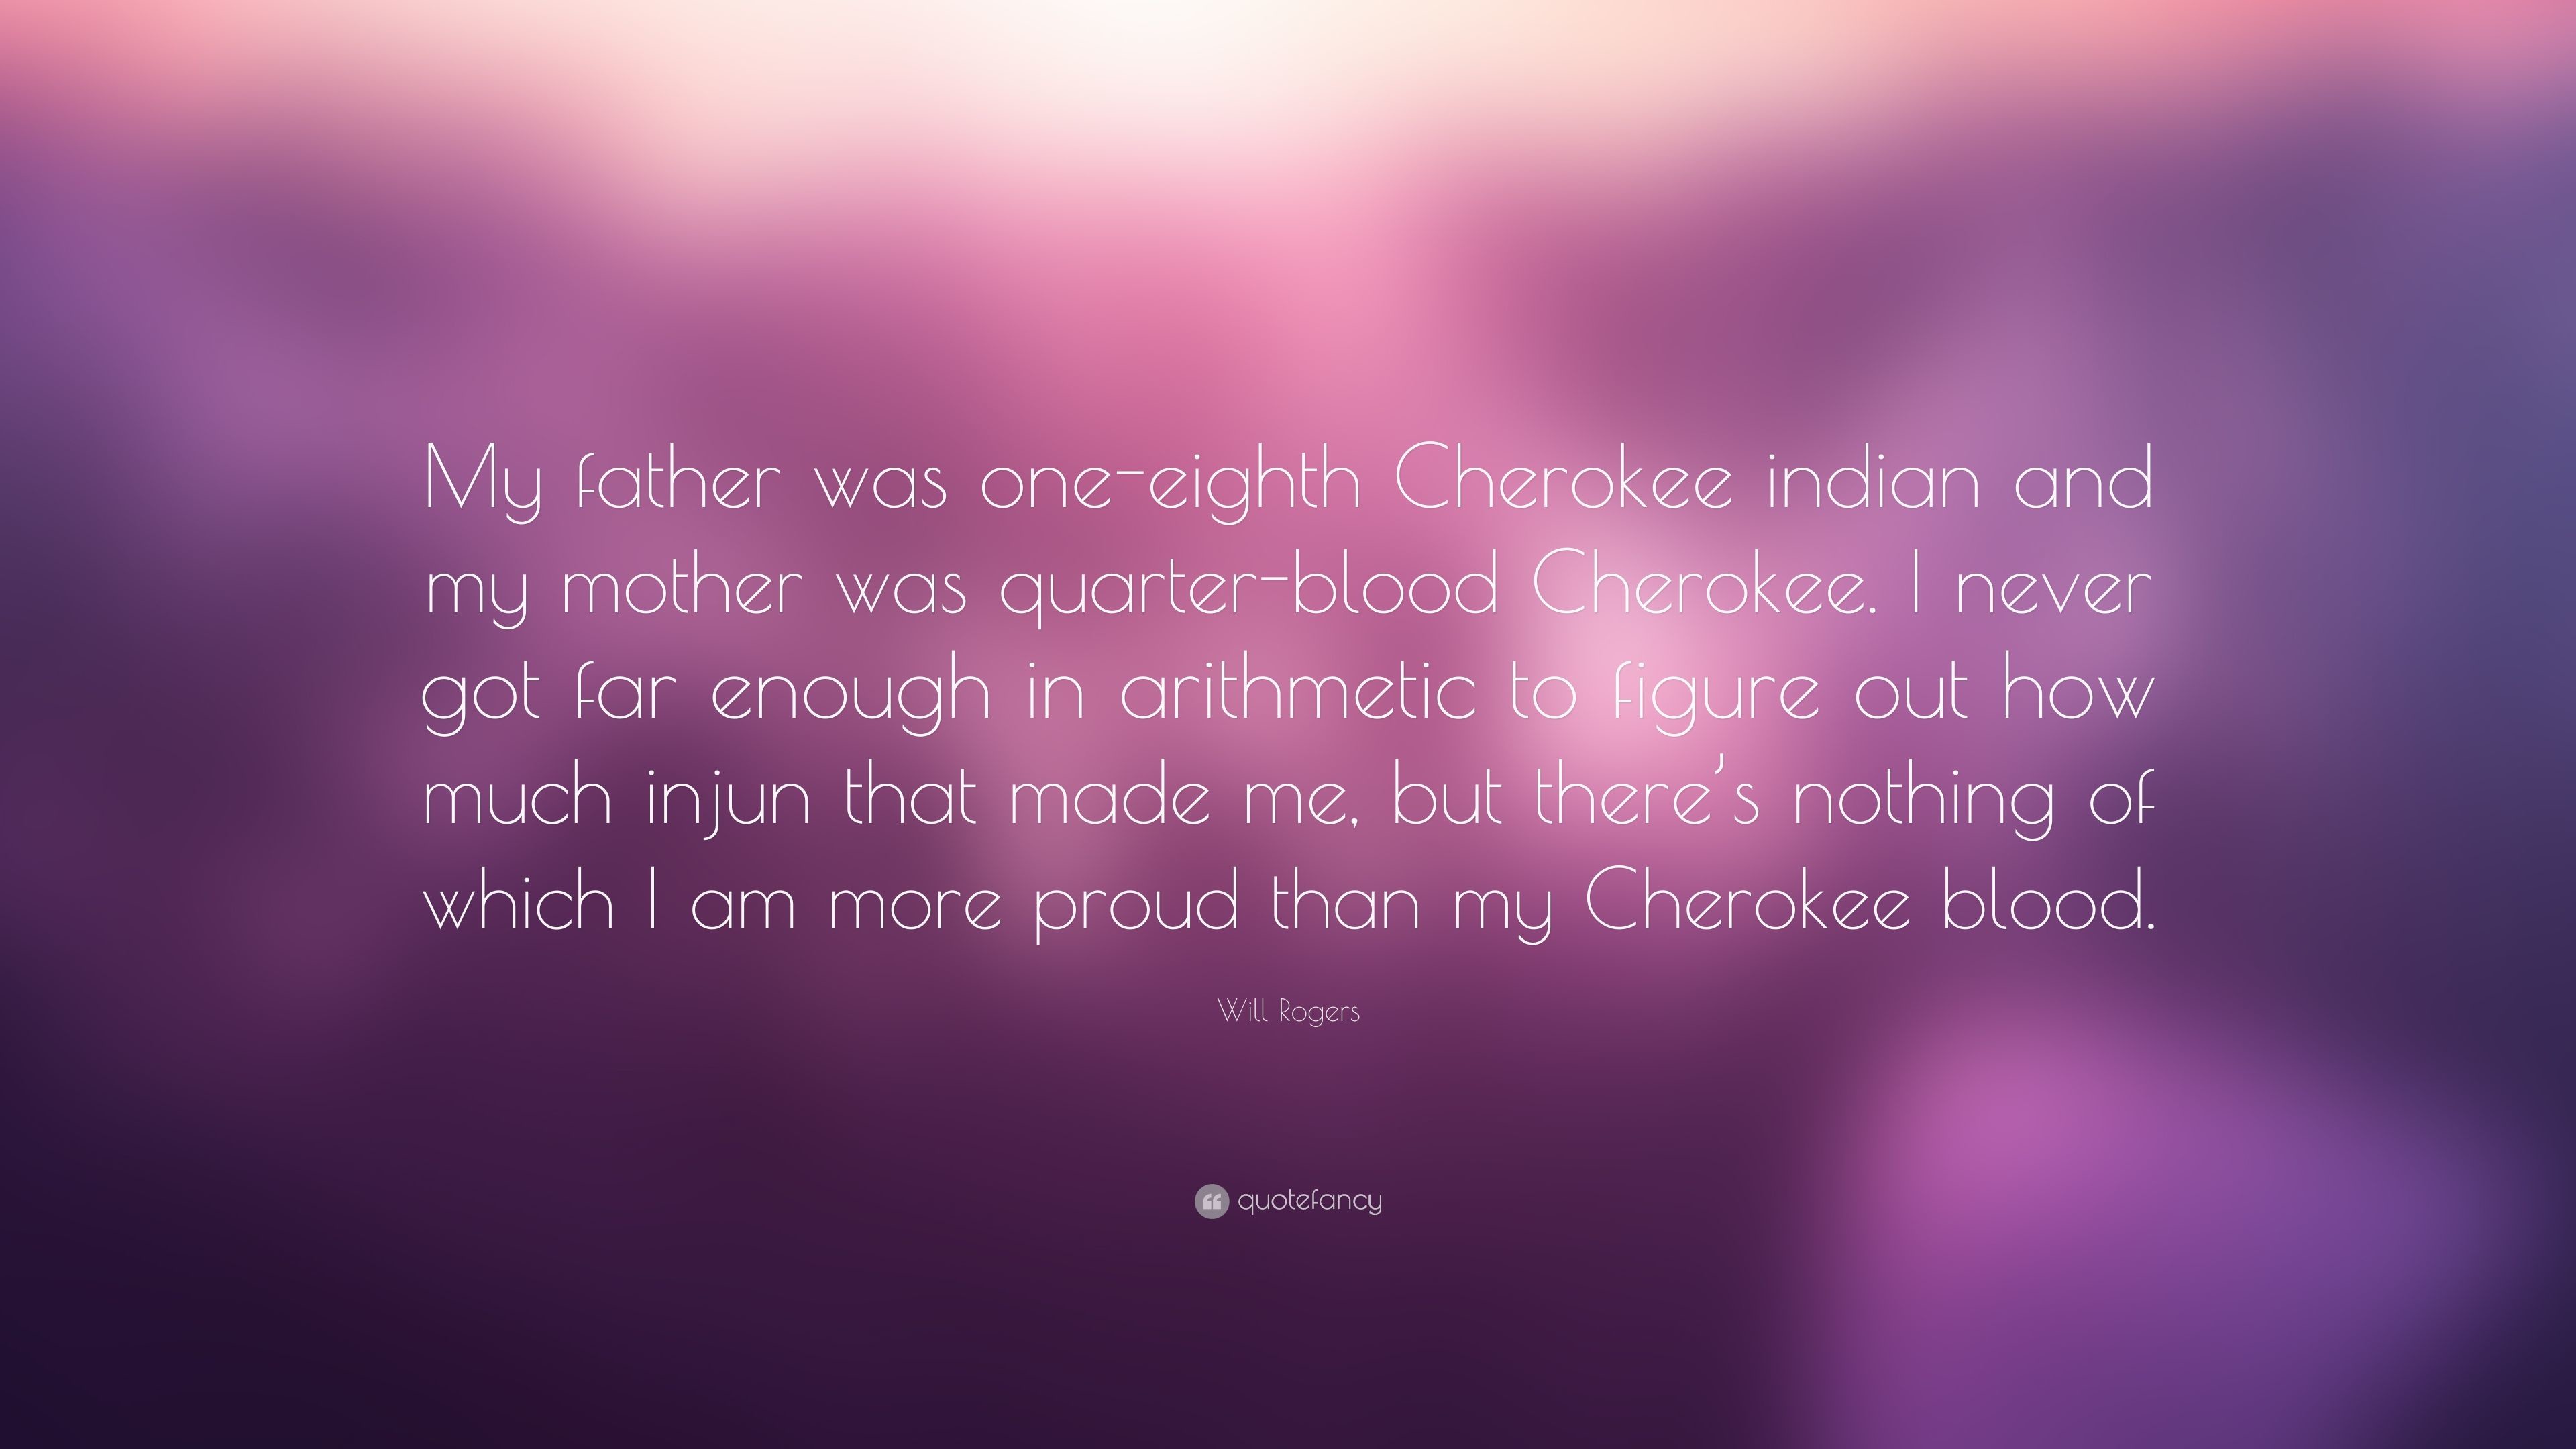 Will Rogers Quote: “My father was one-eighth Cherokee indian and my mother